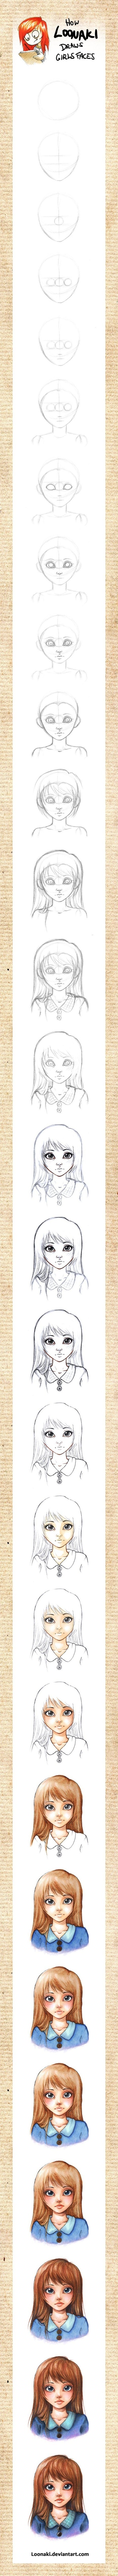 How Loonaki Draws Girls Faces | Drawing References and Resources | Scoop.it